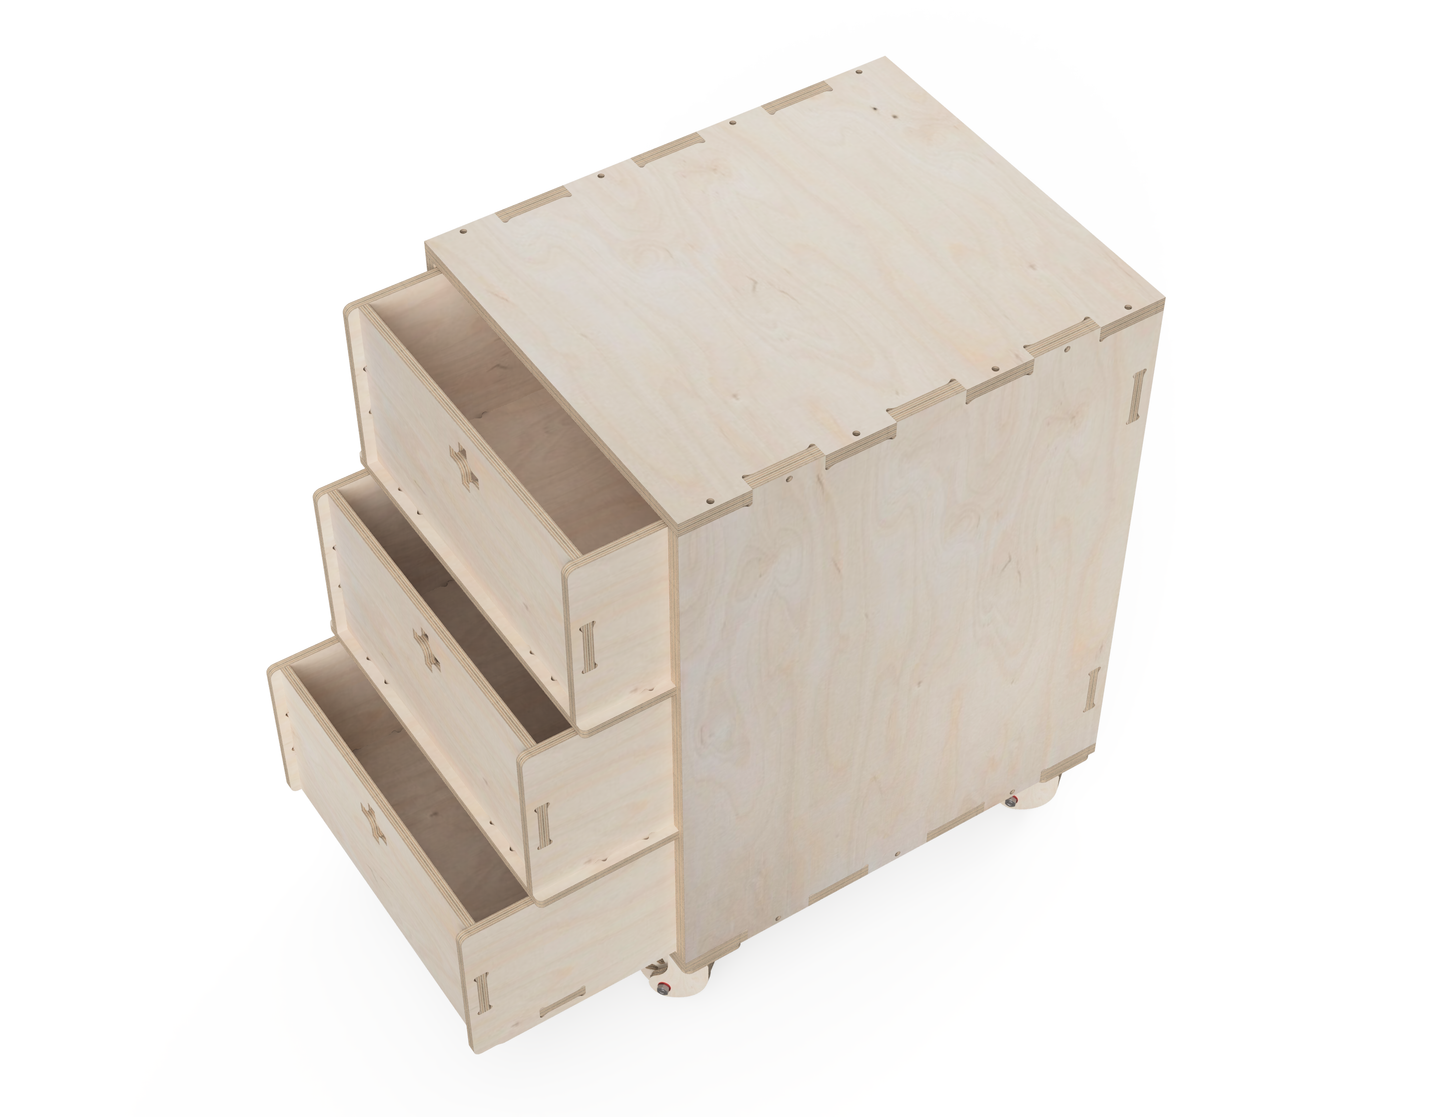 Three Drawer Cabinet For Workshop DXF Files